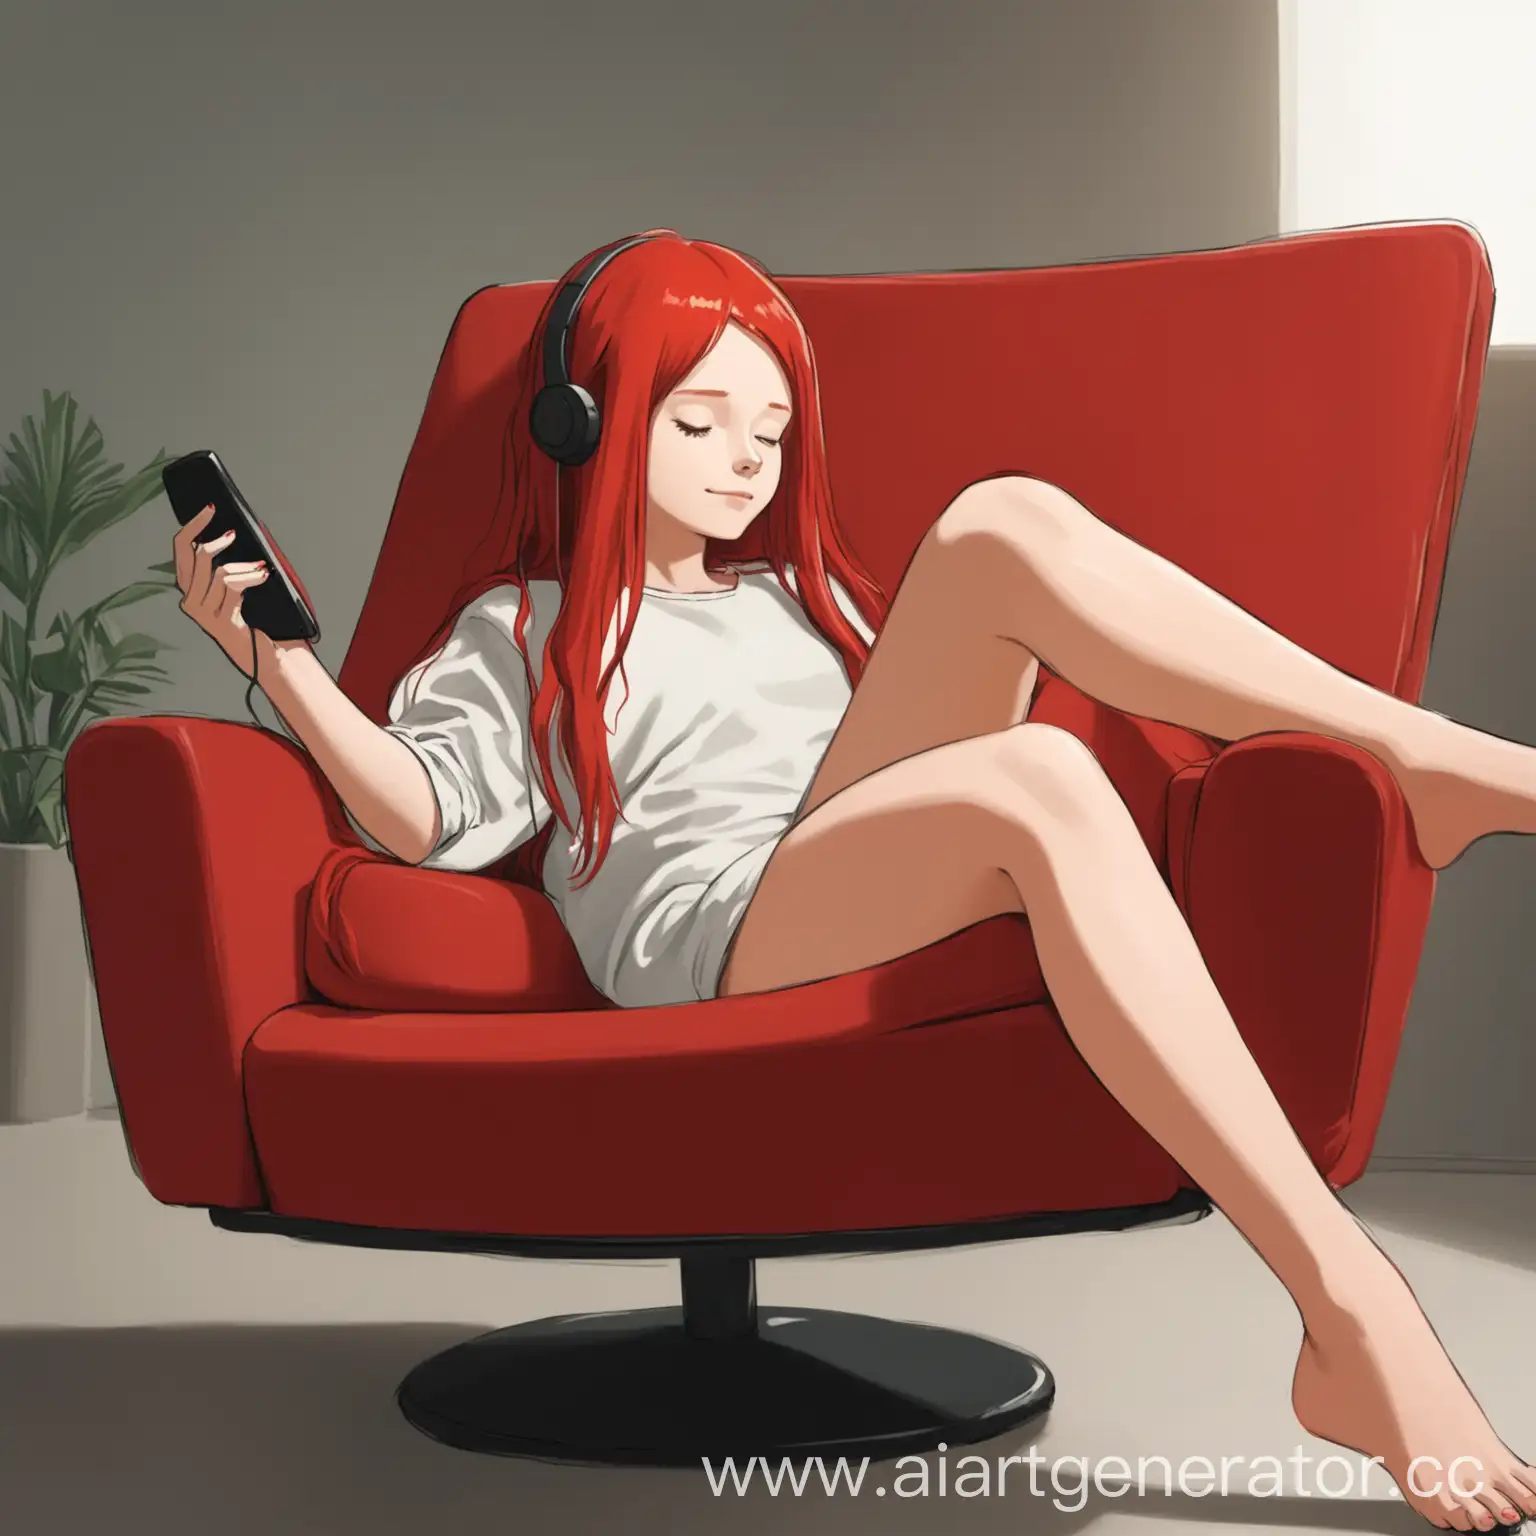 RedHaired-Girl-Relaxing-on-Chair-with-Phone